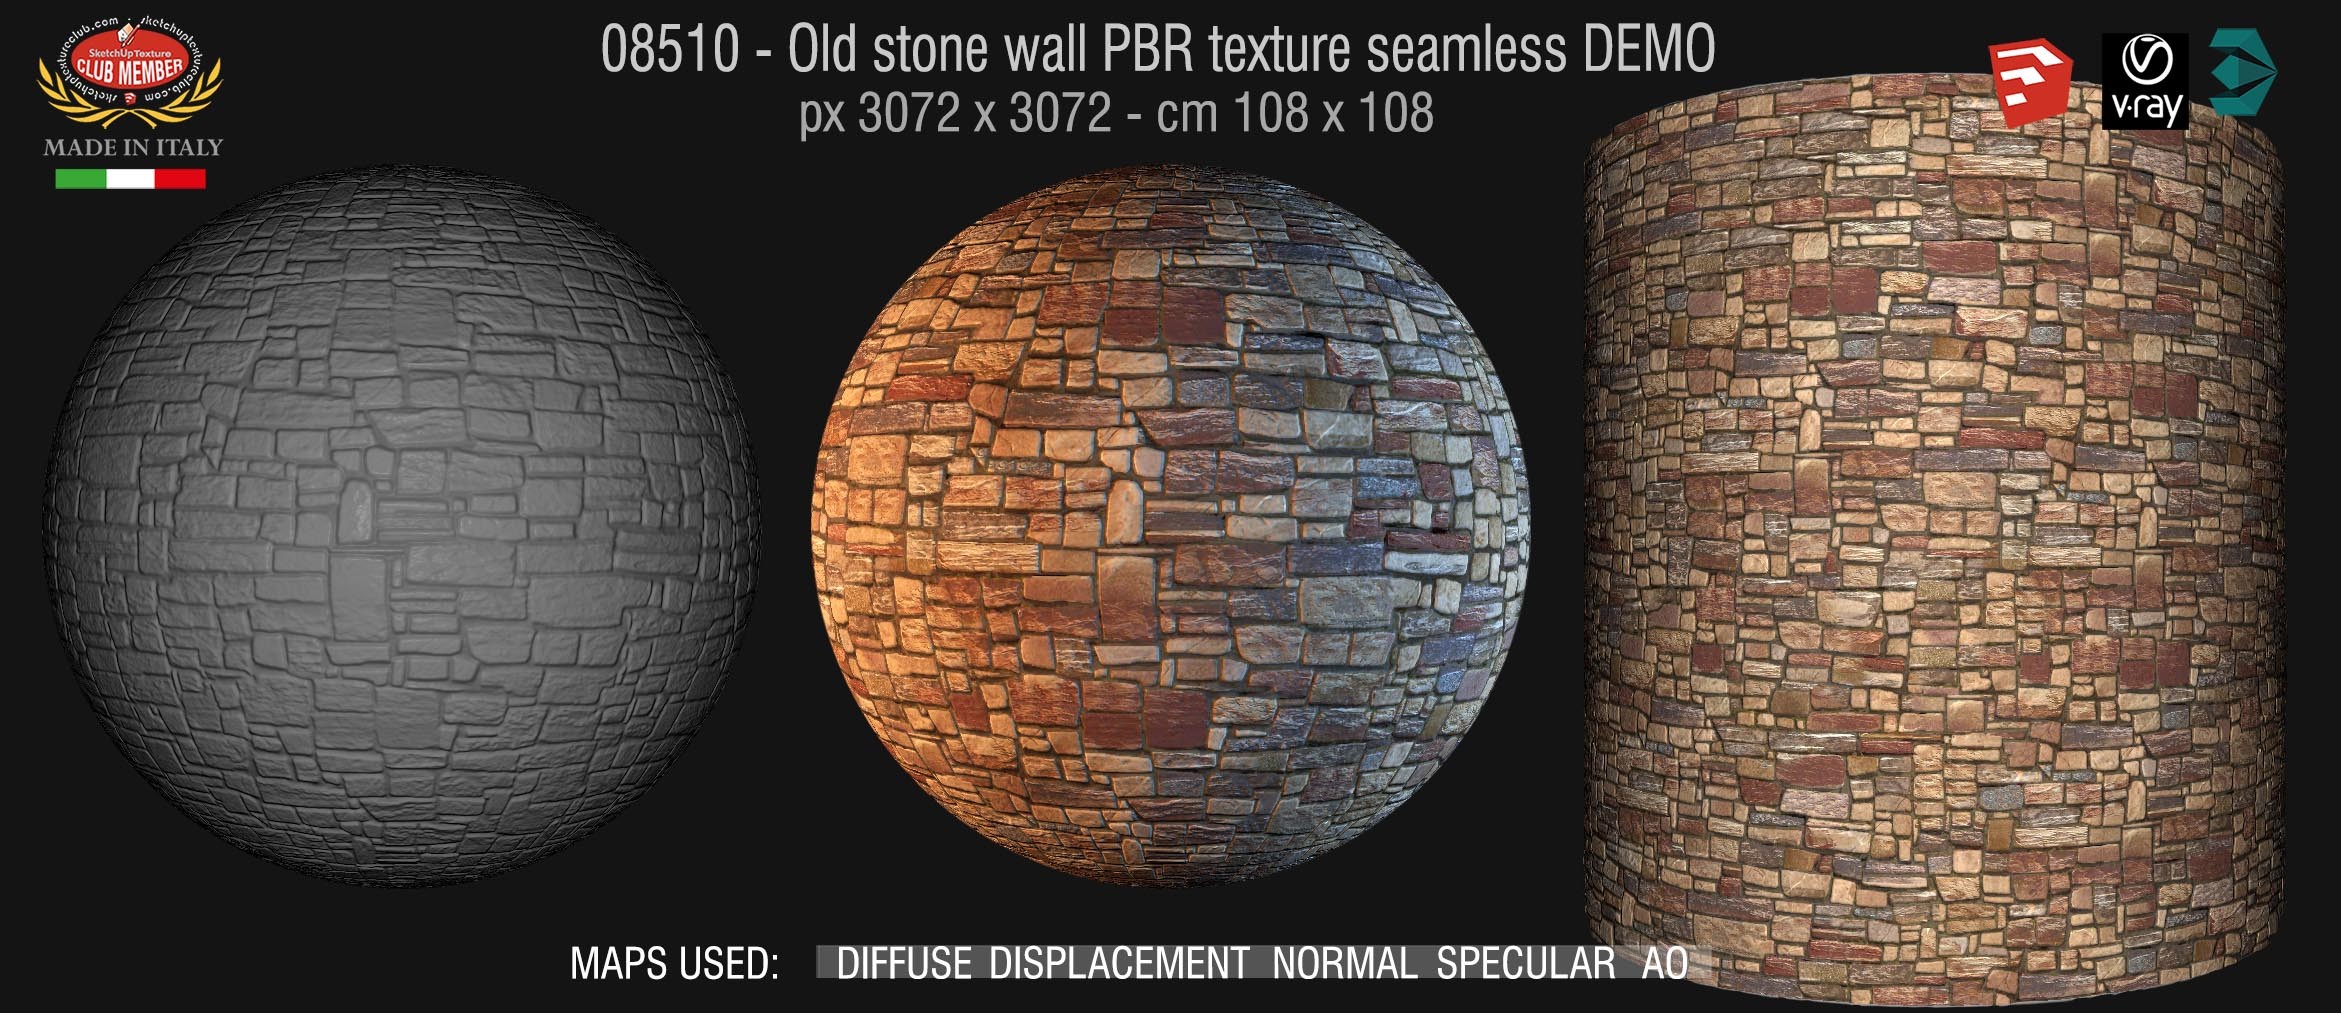 08510 Old stone wall PBR texture seamless DEMO